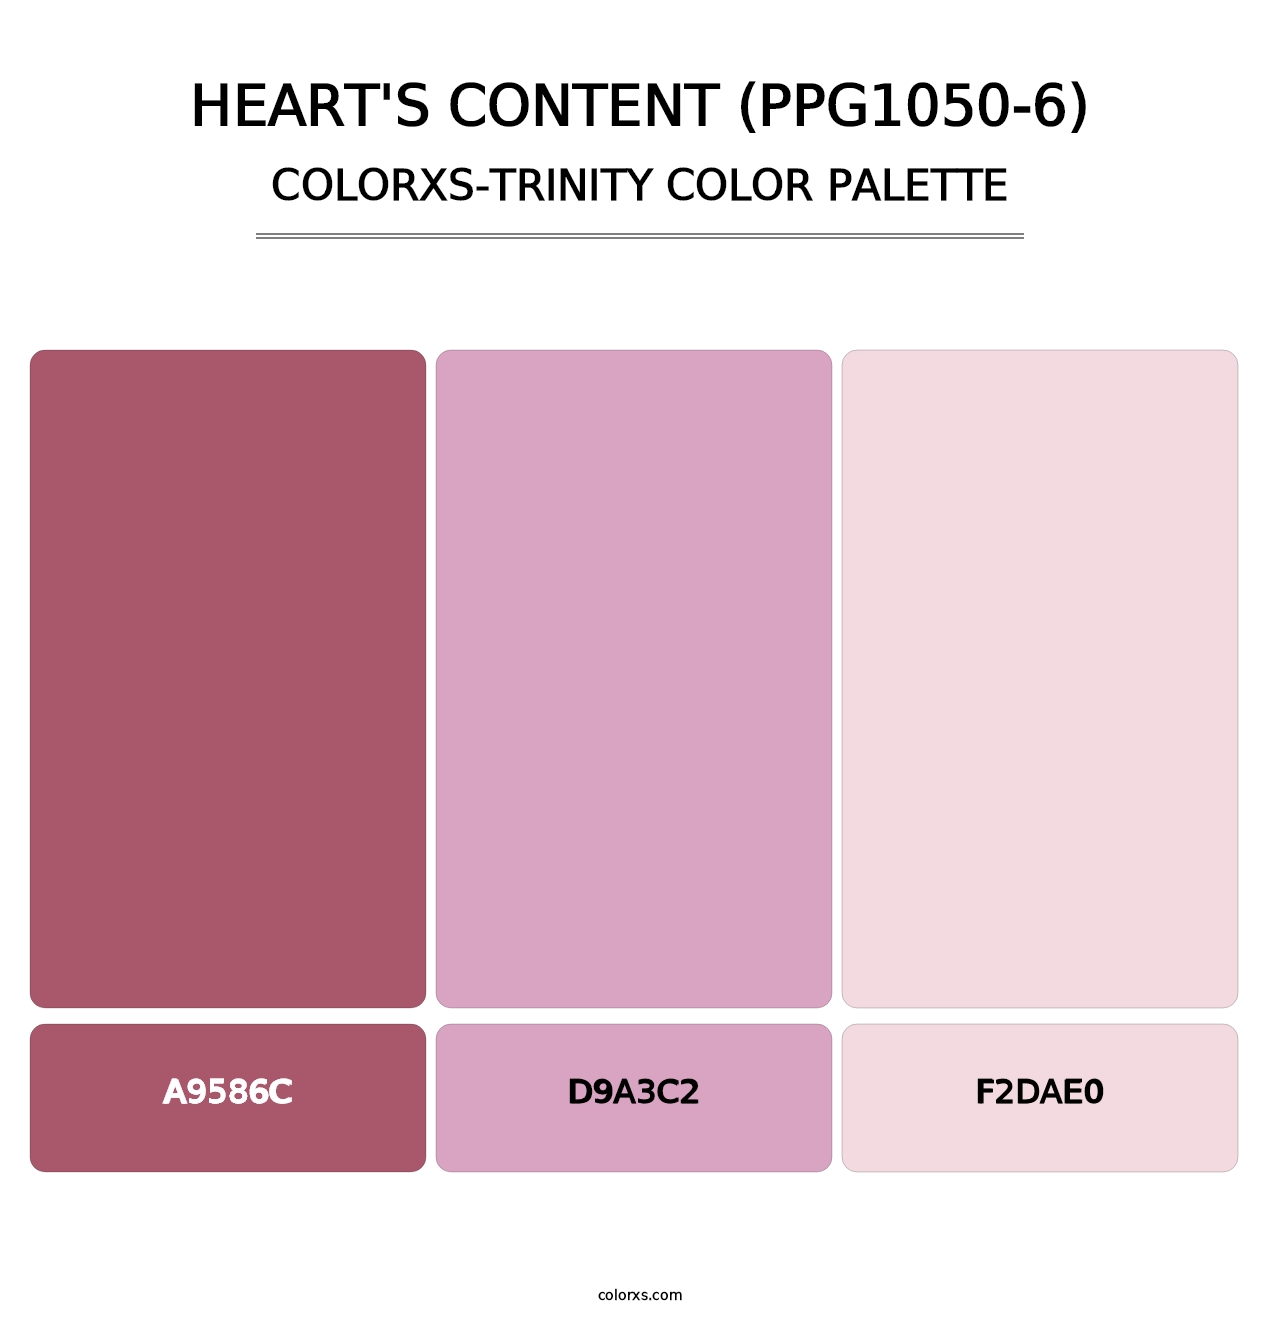 Heart's Content (PPG1050-6) - Colorxs Trinity Palette